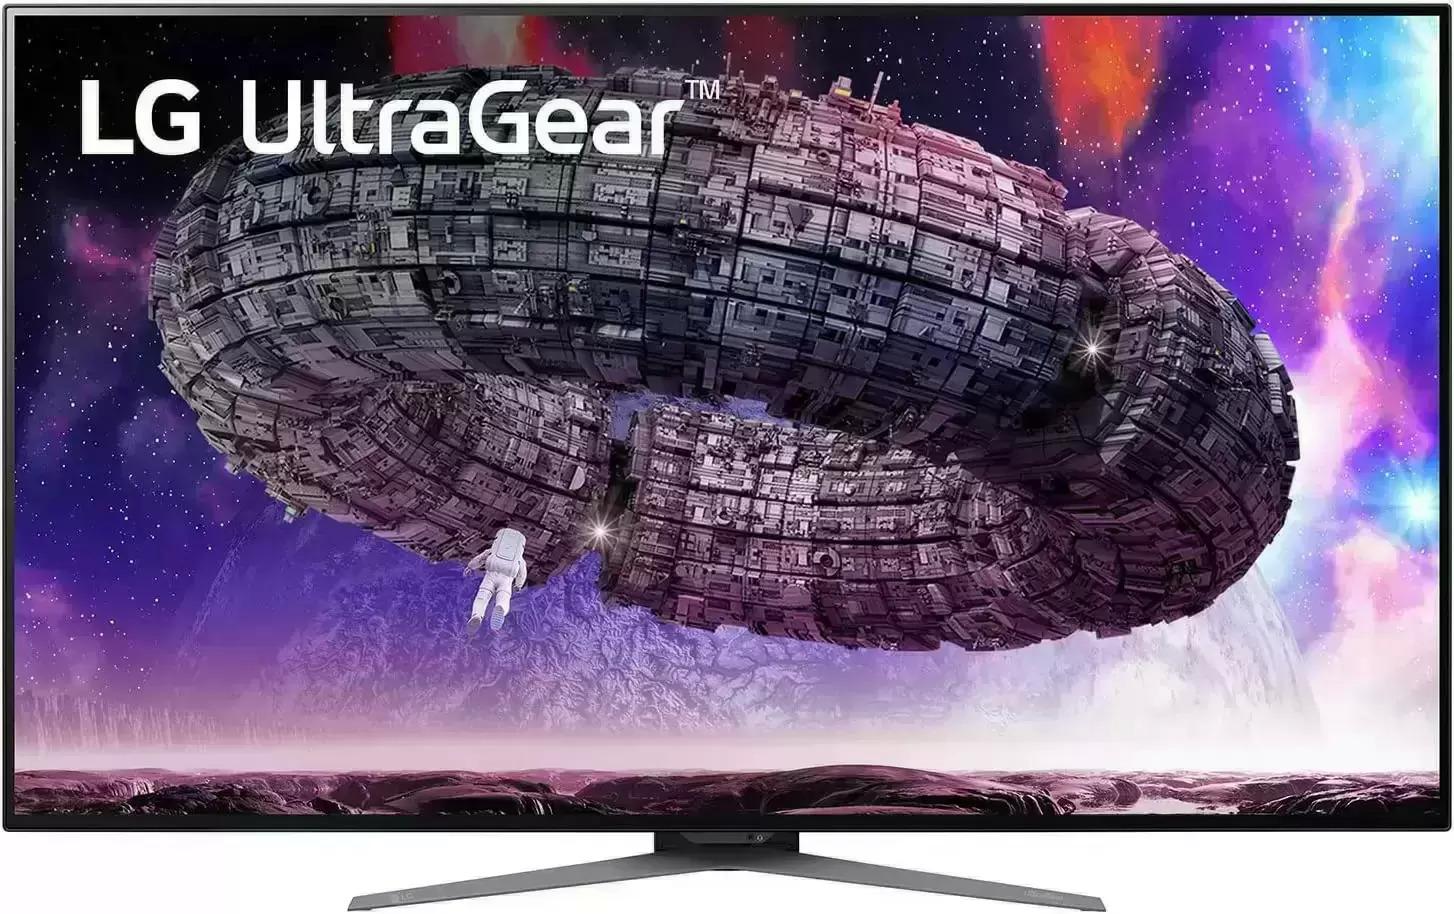 48in LG Ultragear 48GQ900 4K UDH 120Hz OLED Gaming Monitor for $649.99 Shipped